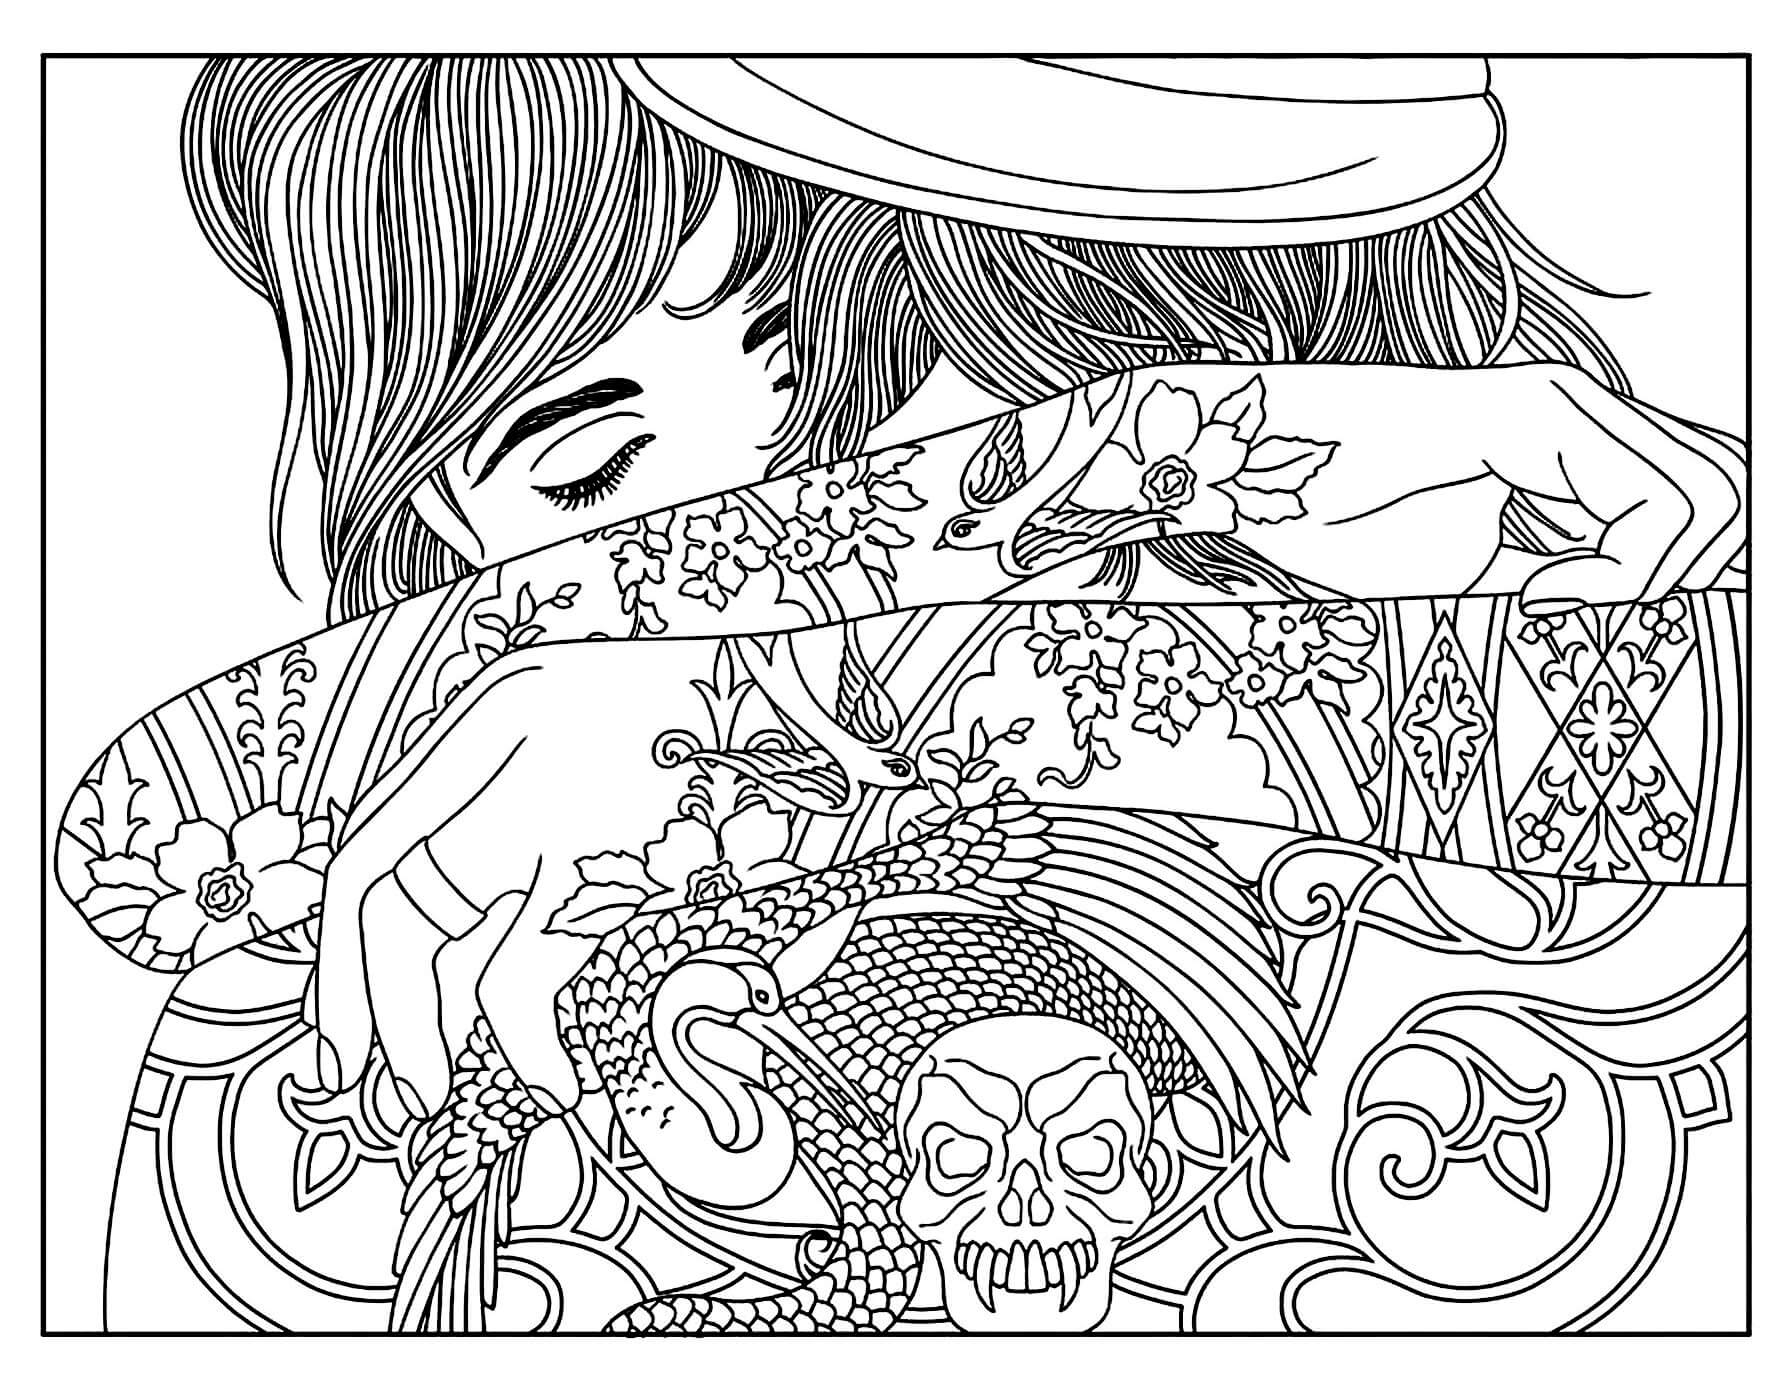 Coloring Pages for Teens - coloring.rocks!